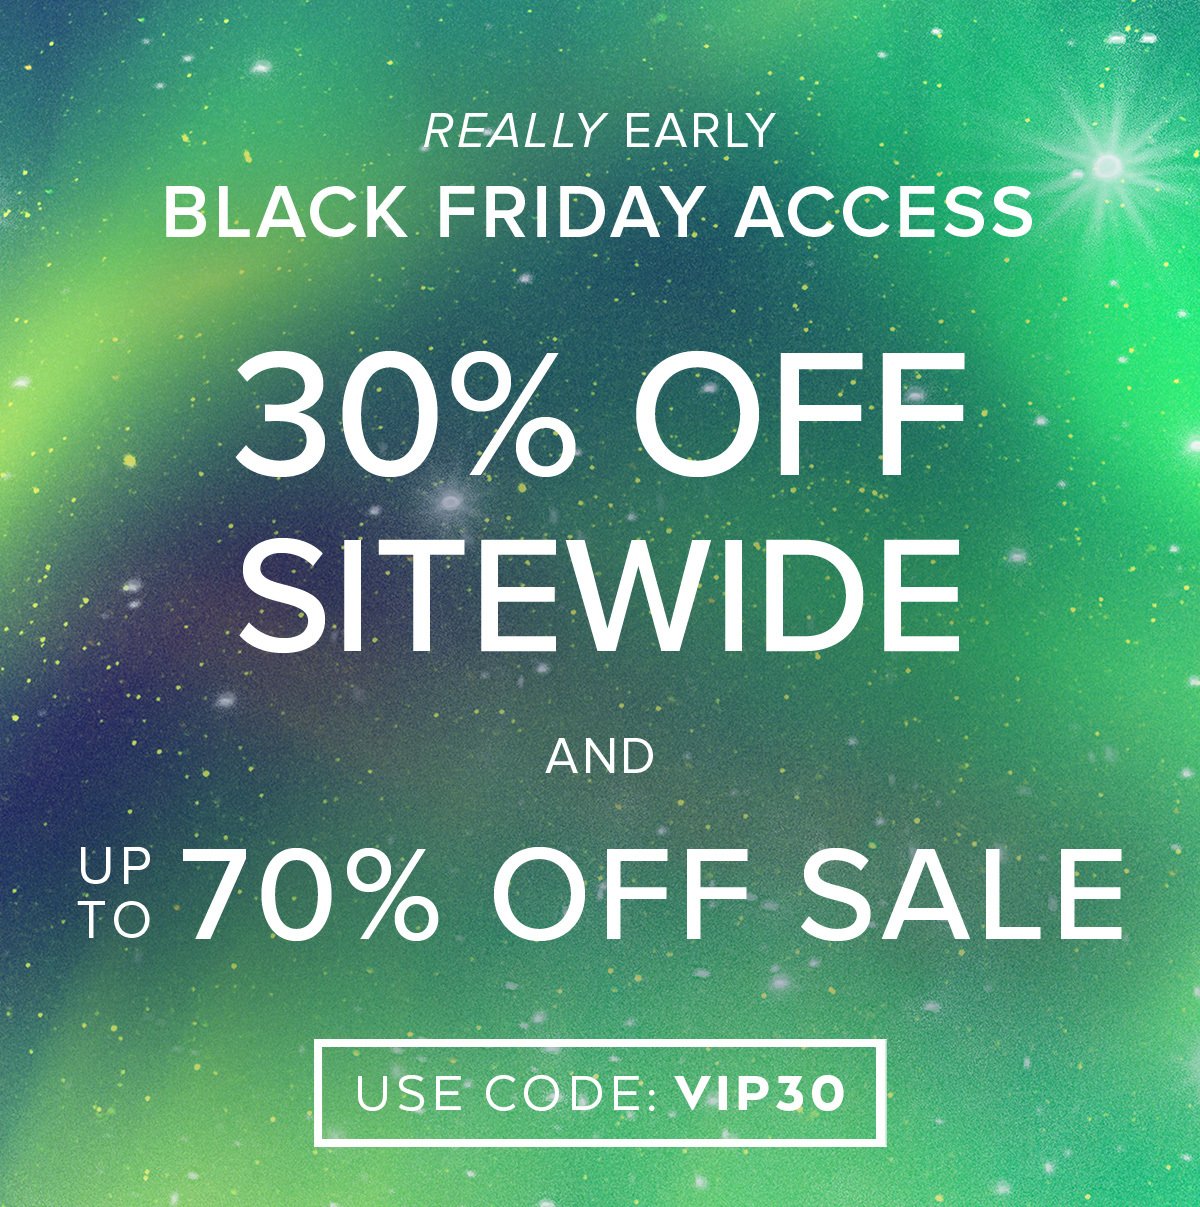 REALLY EARLY BLACK FRIDAY ACCESS 30% OFF SITEWIDE AND UP TO 70% OFF SALE USE CODE VIP30